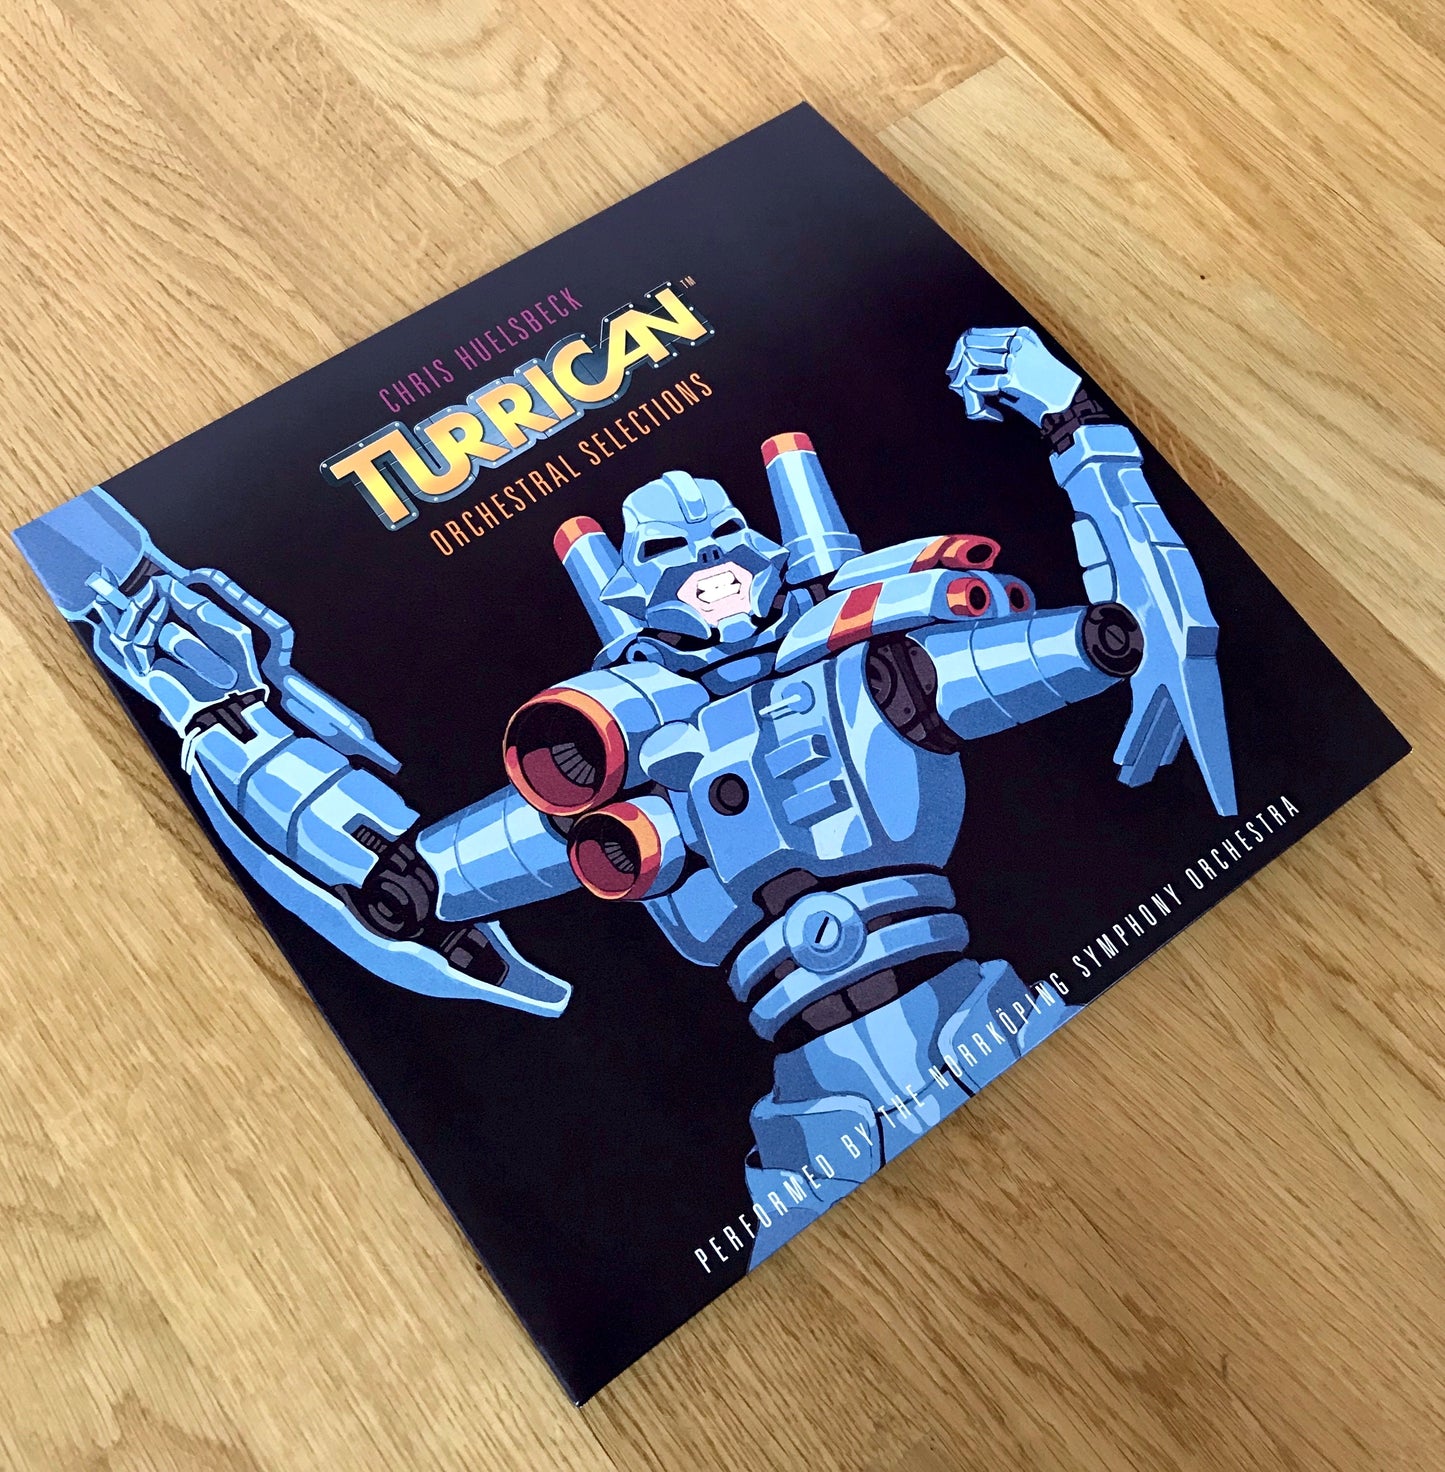 Turrican - Orchestral Selections Double Vinyl  & digital downloads